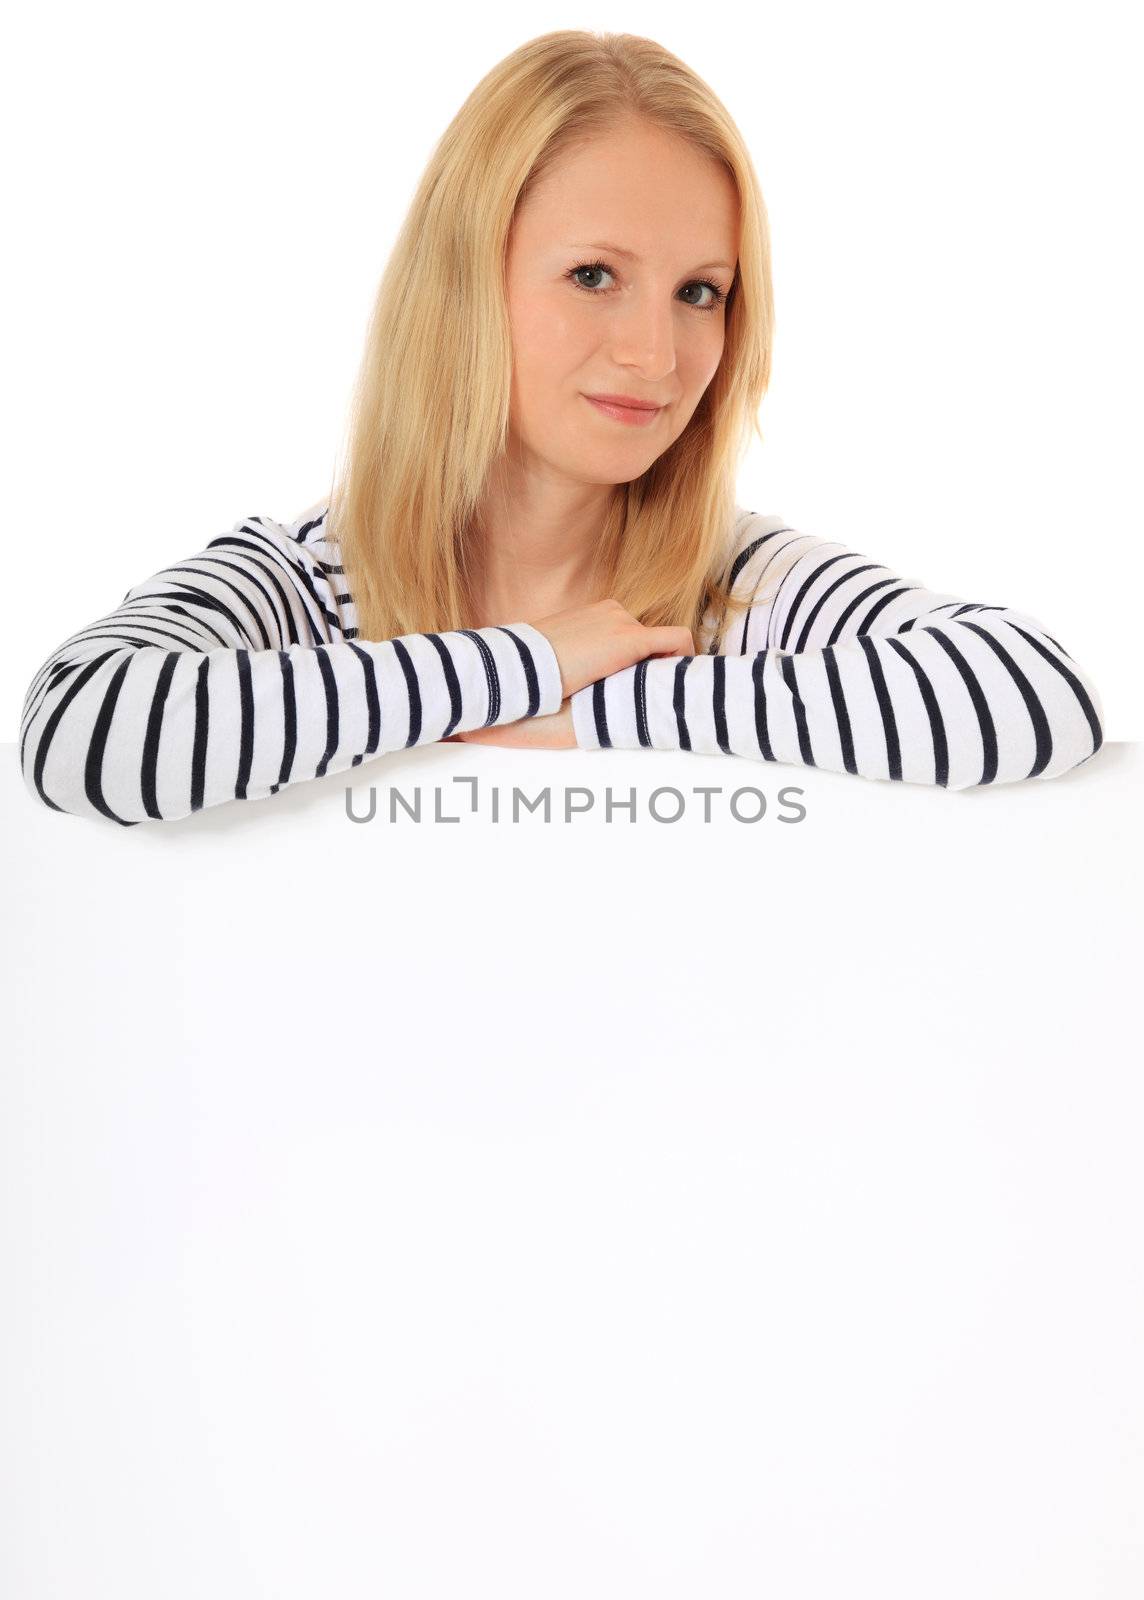 Attractive blond woman behind blank white sign. All on white background.